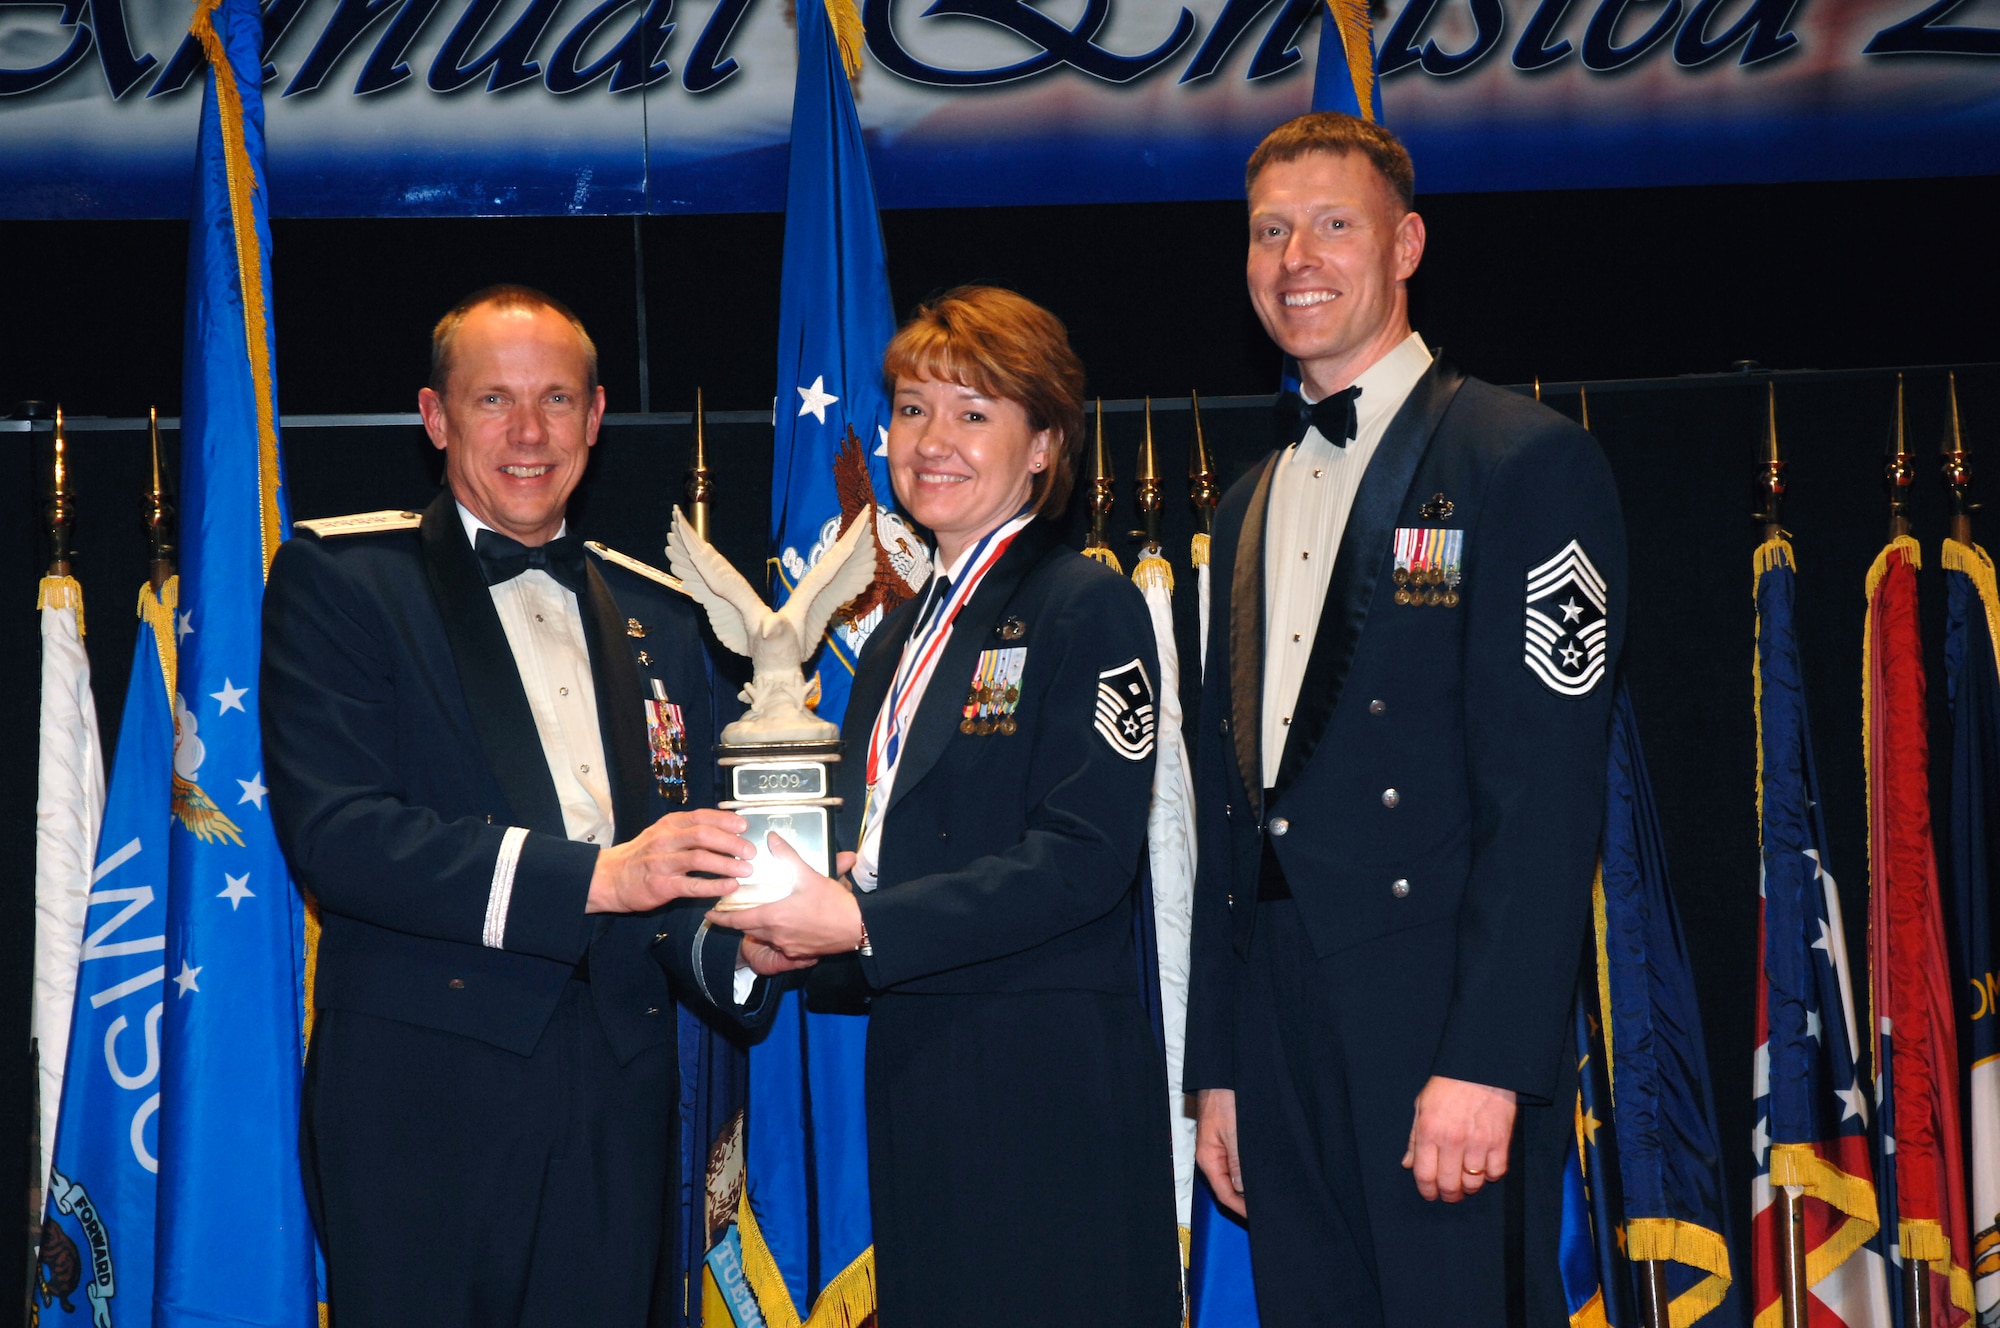 AFMC Commander Gen. Hoffman (left) and AFMC Command Chief Master Sgt. William Gurney present the first sergeant award to Master Sgt. Christina Kibler of the 78th Force Support Squadron at the 2009 Annual Enlisted Awards Banquet. U. S. Air Foce Photo by Al Bright